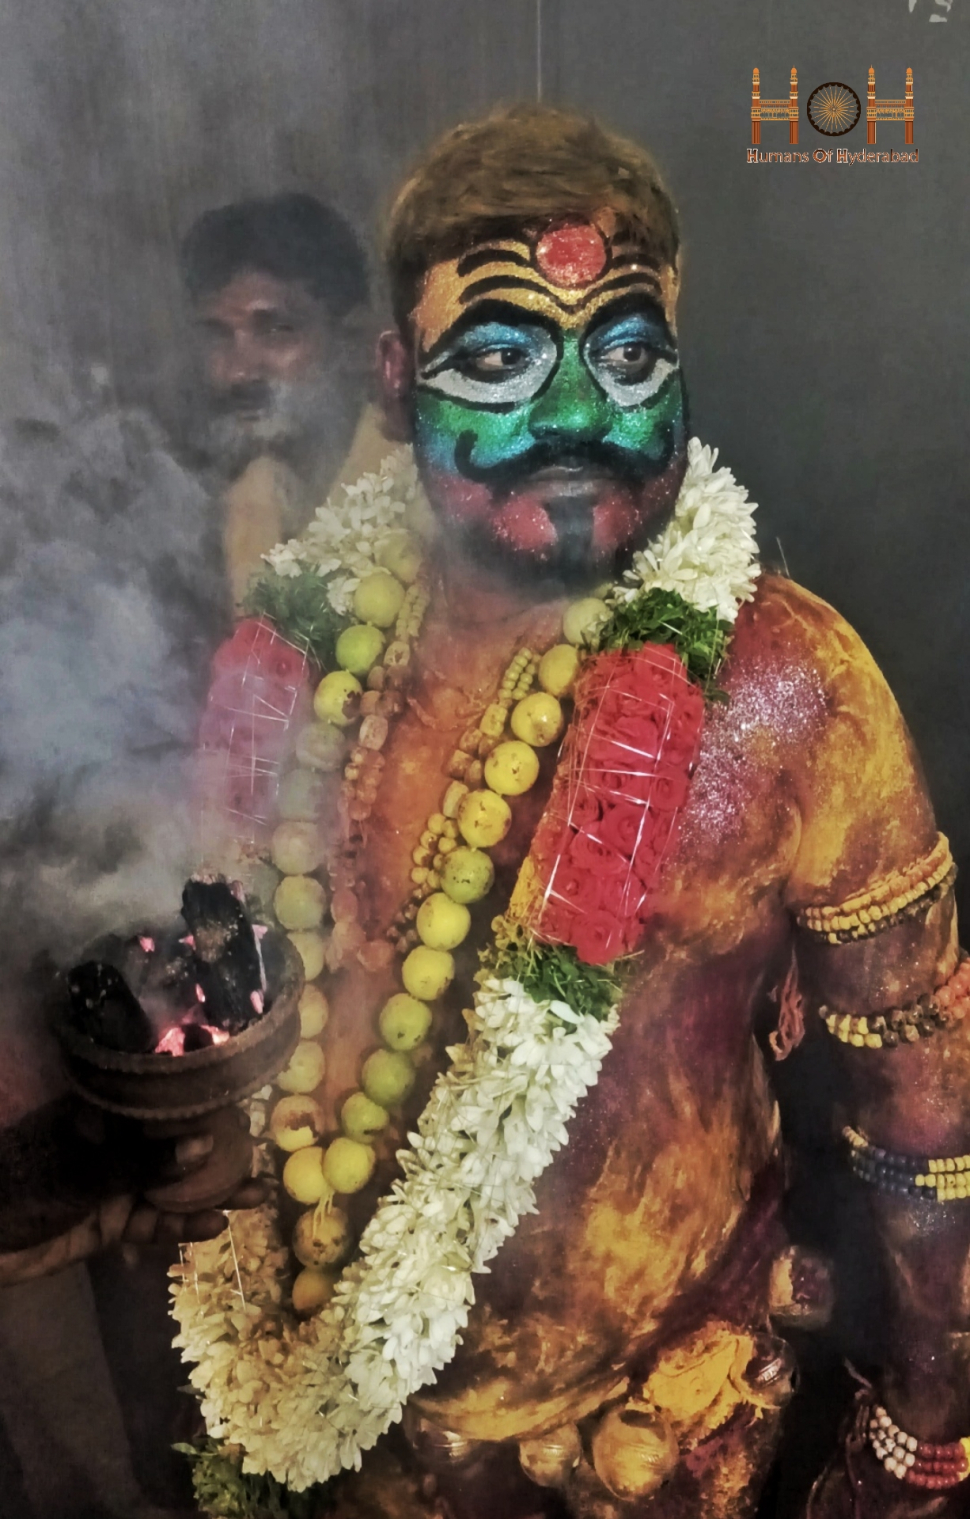 Potharaju The Cynosure Of Bonalu Processions In Hyderabad Humans Of